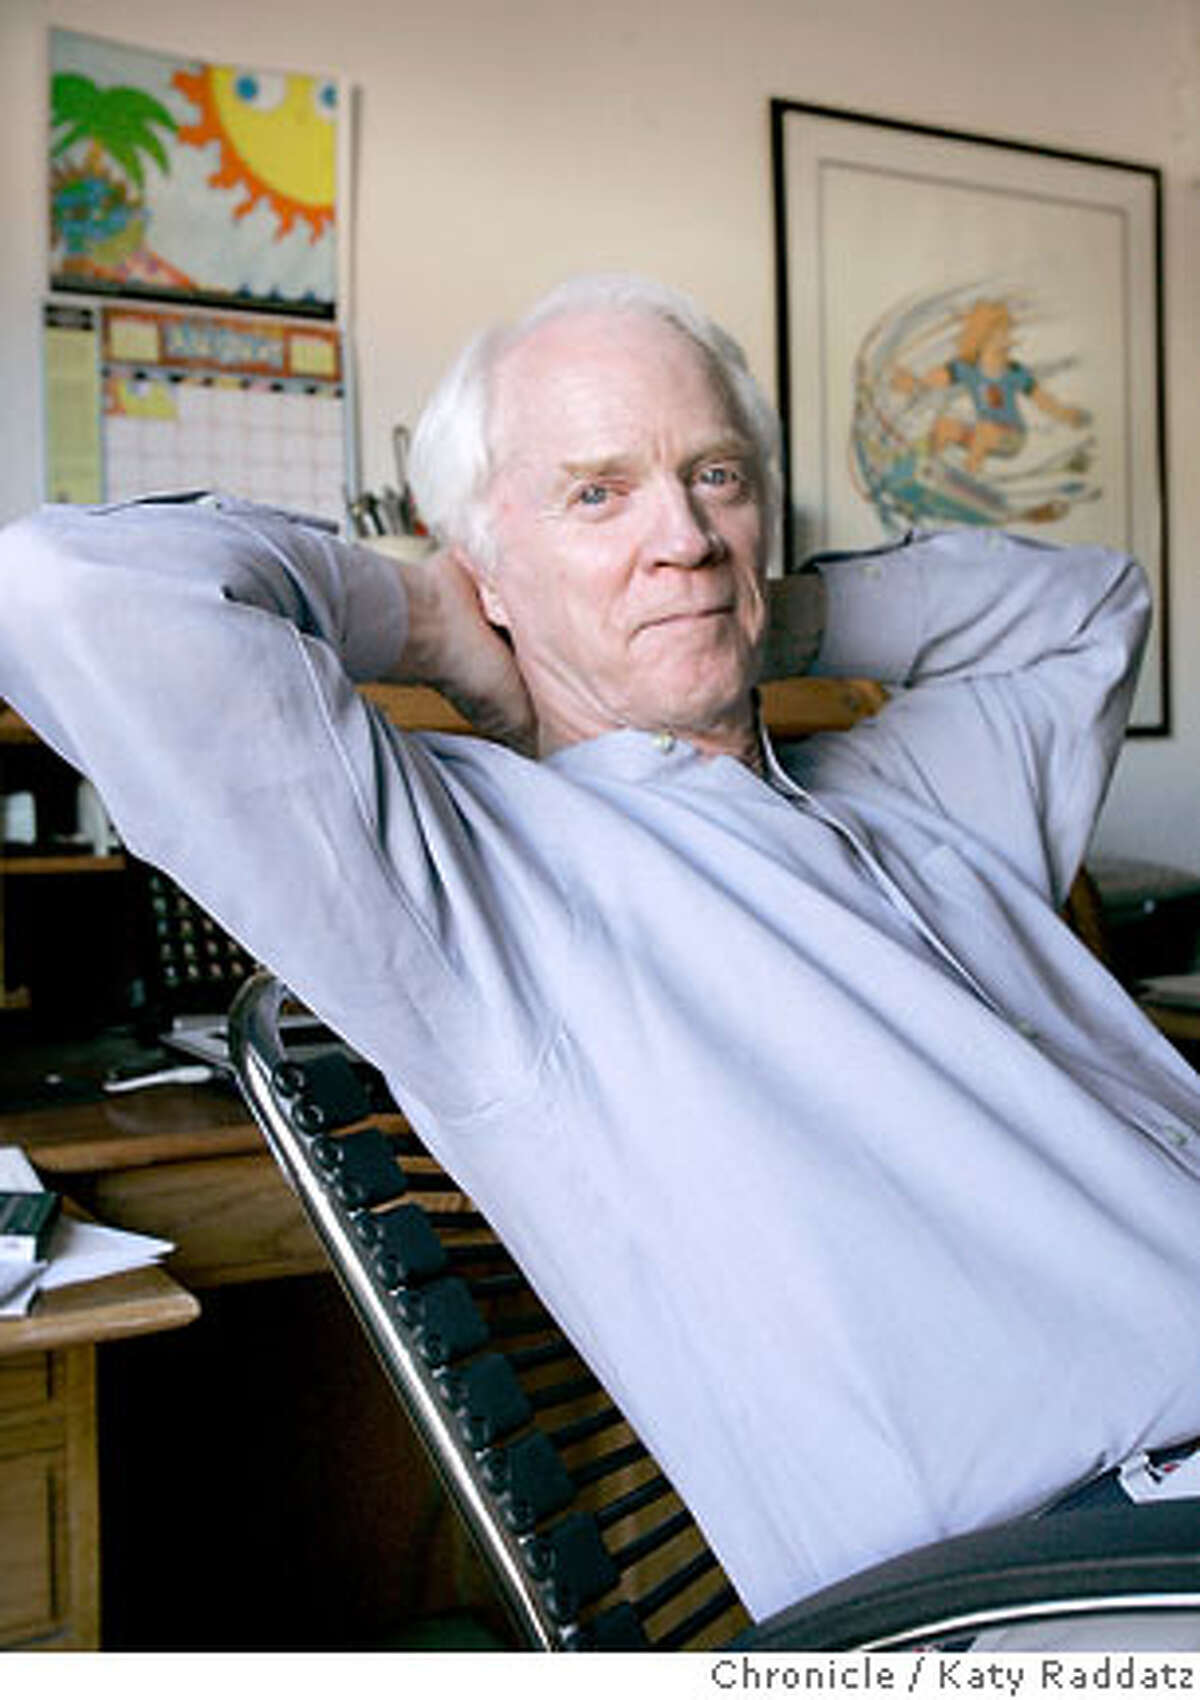 SHOWN: Rusty Schweickart, the Chairman of the B612 Foundation. The B612 Foundation is trying to build an asteroid defense system. We photograph Rusty Schweickart in his home office in Tiburon, CA. These photos were shot in Tiburon, CA. on Wednesday, Aug. 30, 2006. (Katy Raddatz/The S.F.Chronicle) **Rusty Schweickart